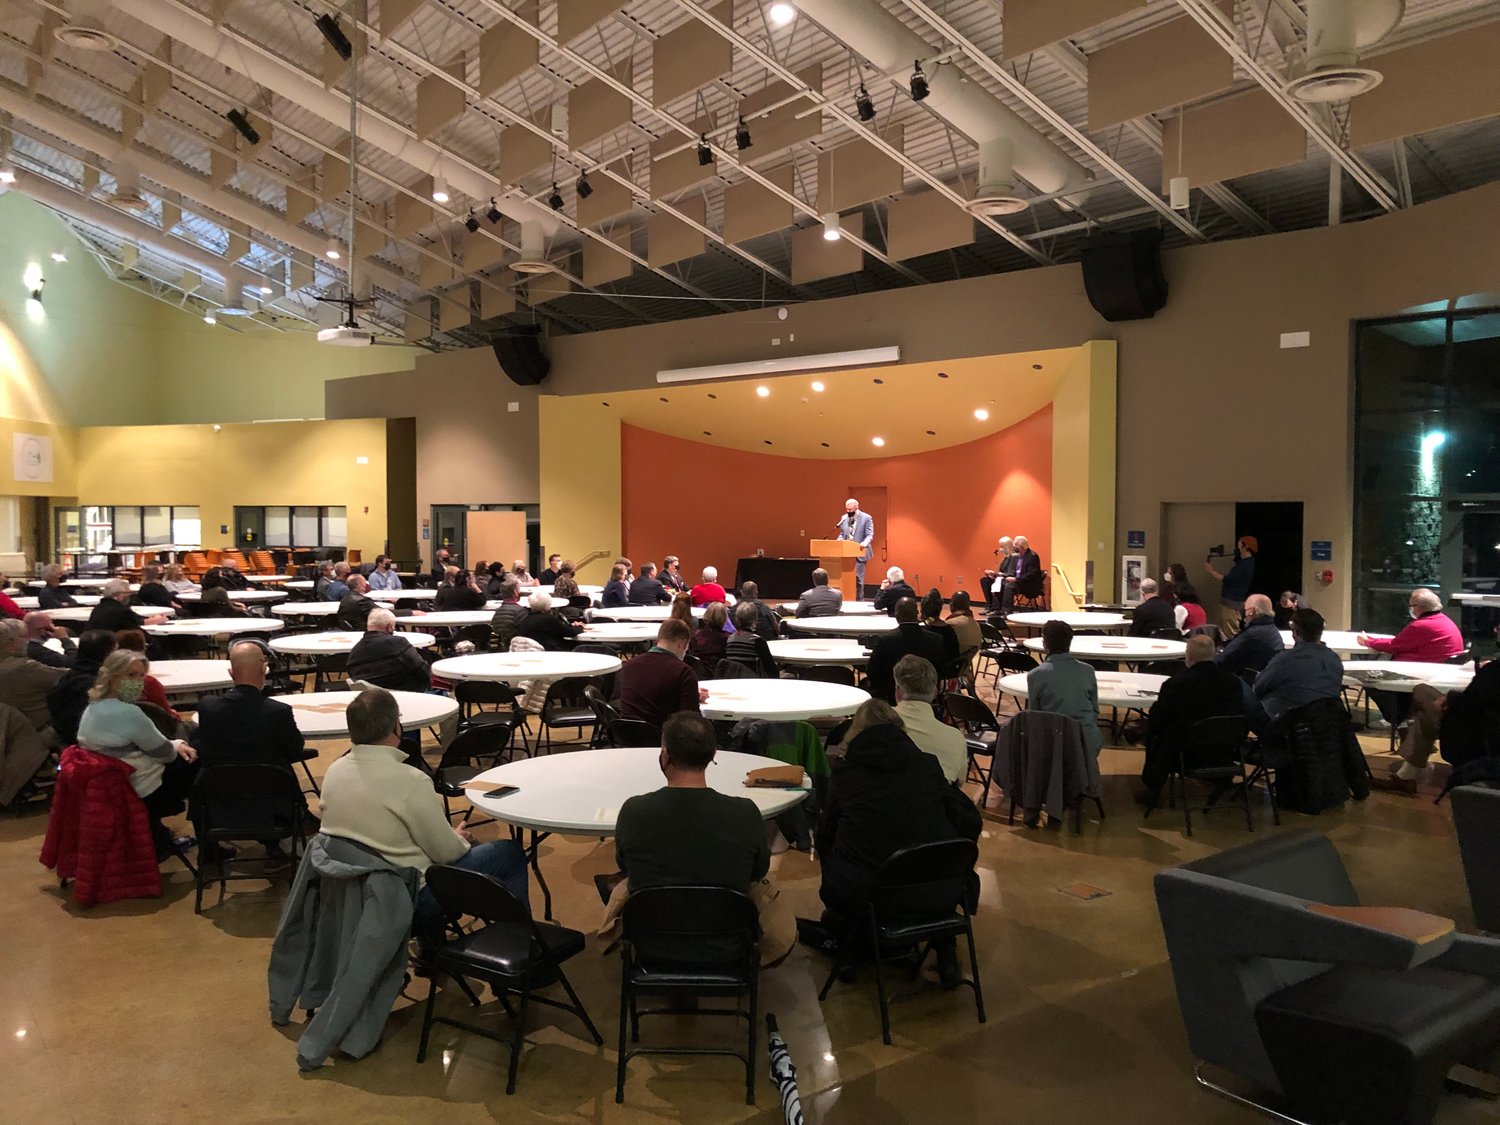 Social-distancing requirements spread apart most of the approximately 120 people who attended the retirement event for Tumwater Mayor Pete Kmet on Dec. 15, 2021.